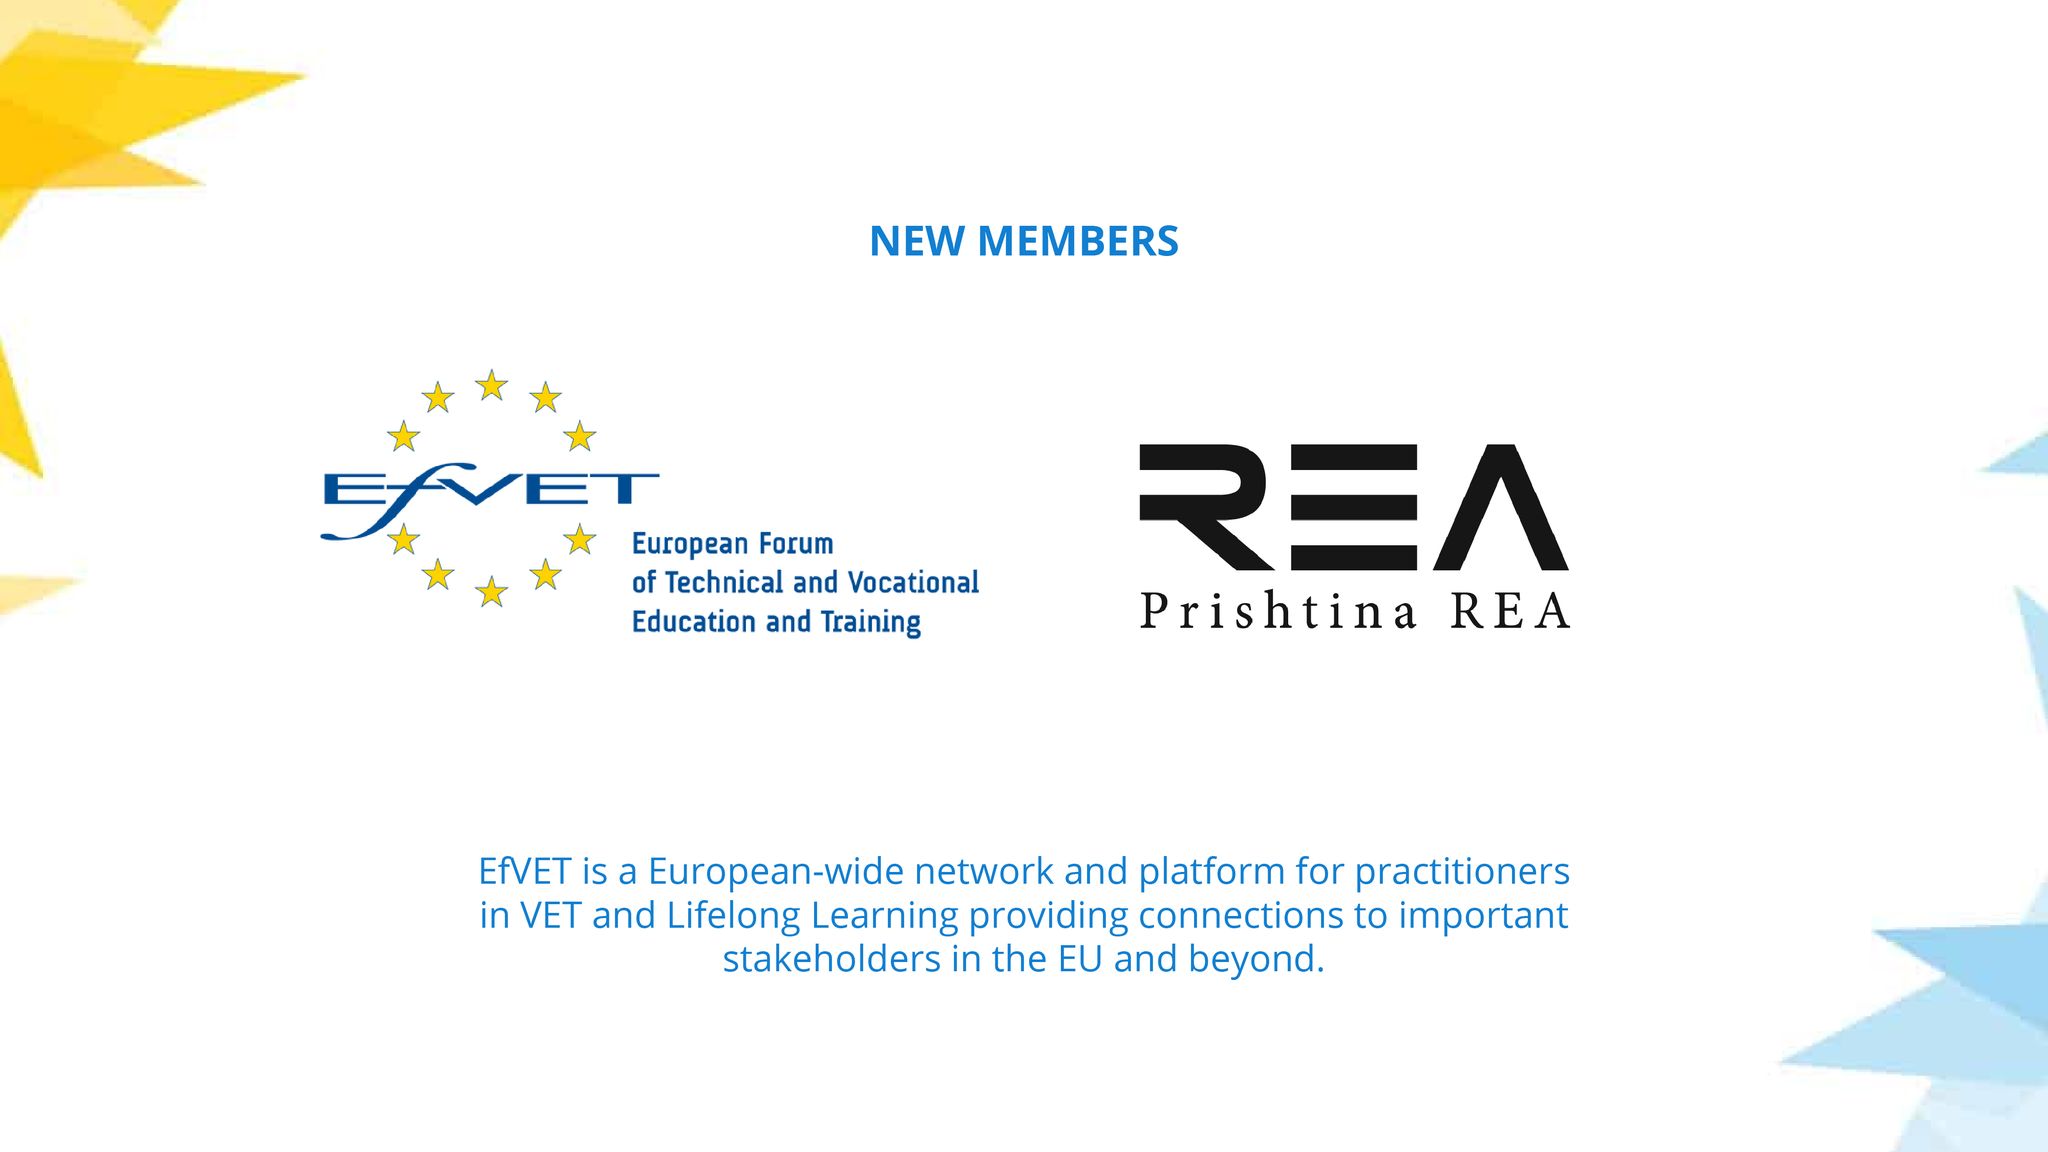 Prishtina REA, the newest member of EfVET –  the European Forum of Technical and Vocational Education and Training